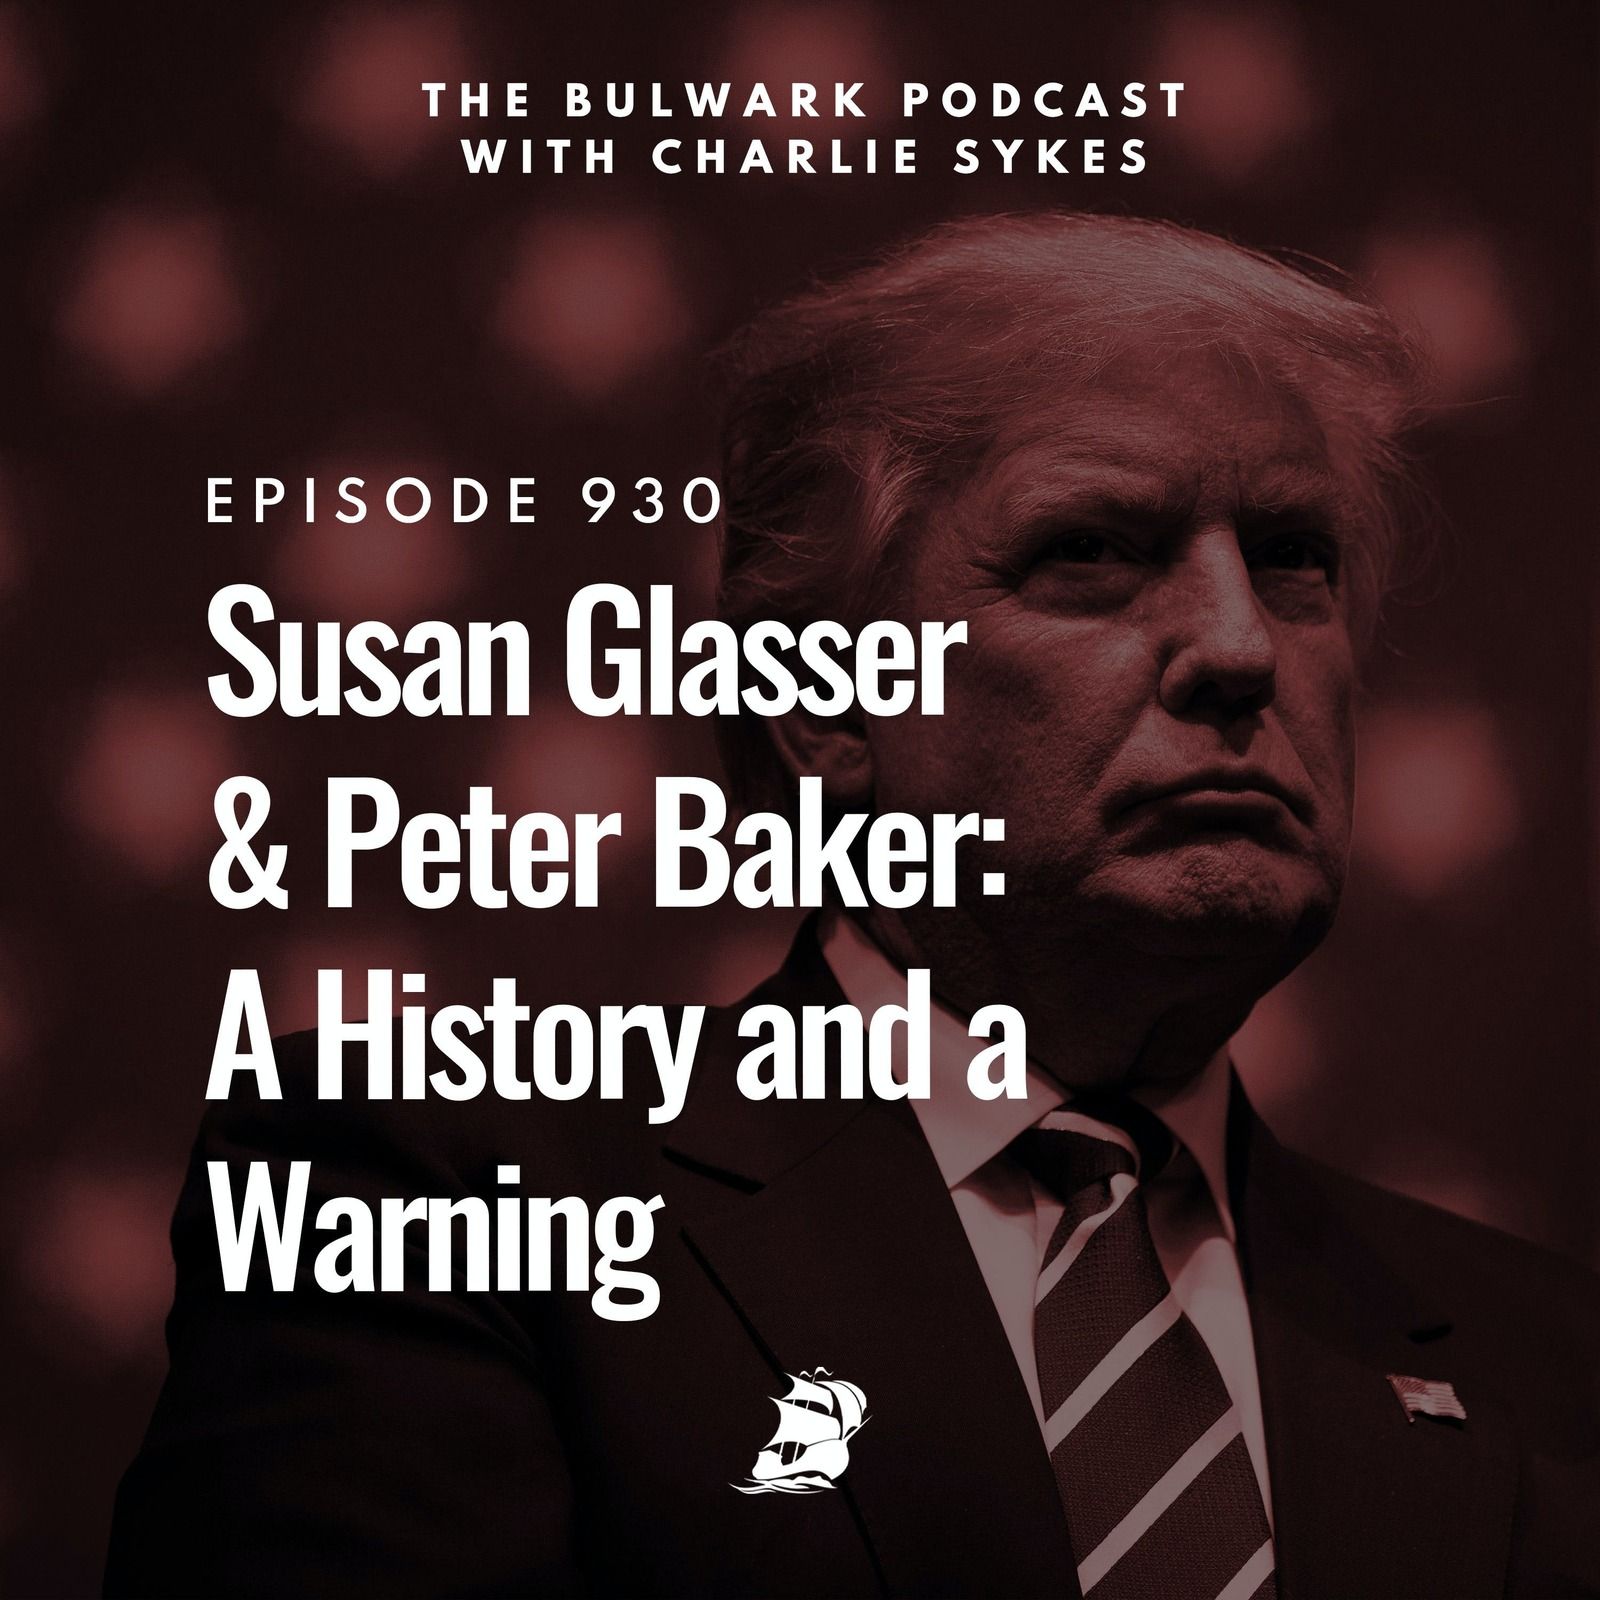 Susan Glasser & Peter Baker: A History and a Warning by The Bulwark Podcast